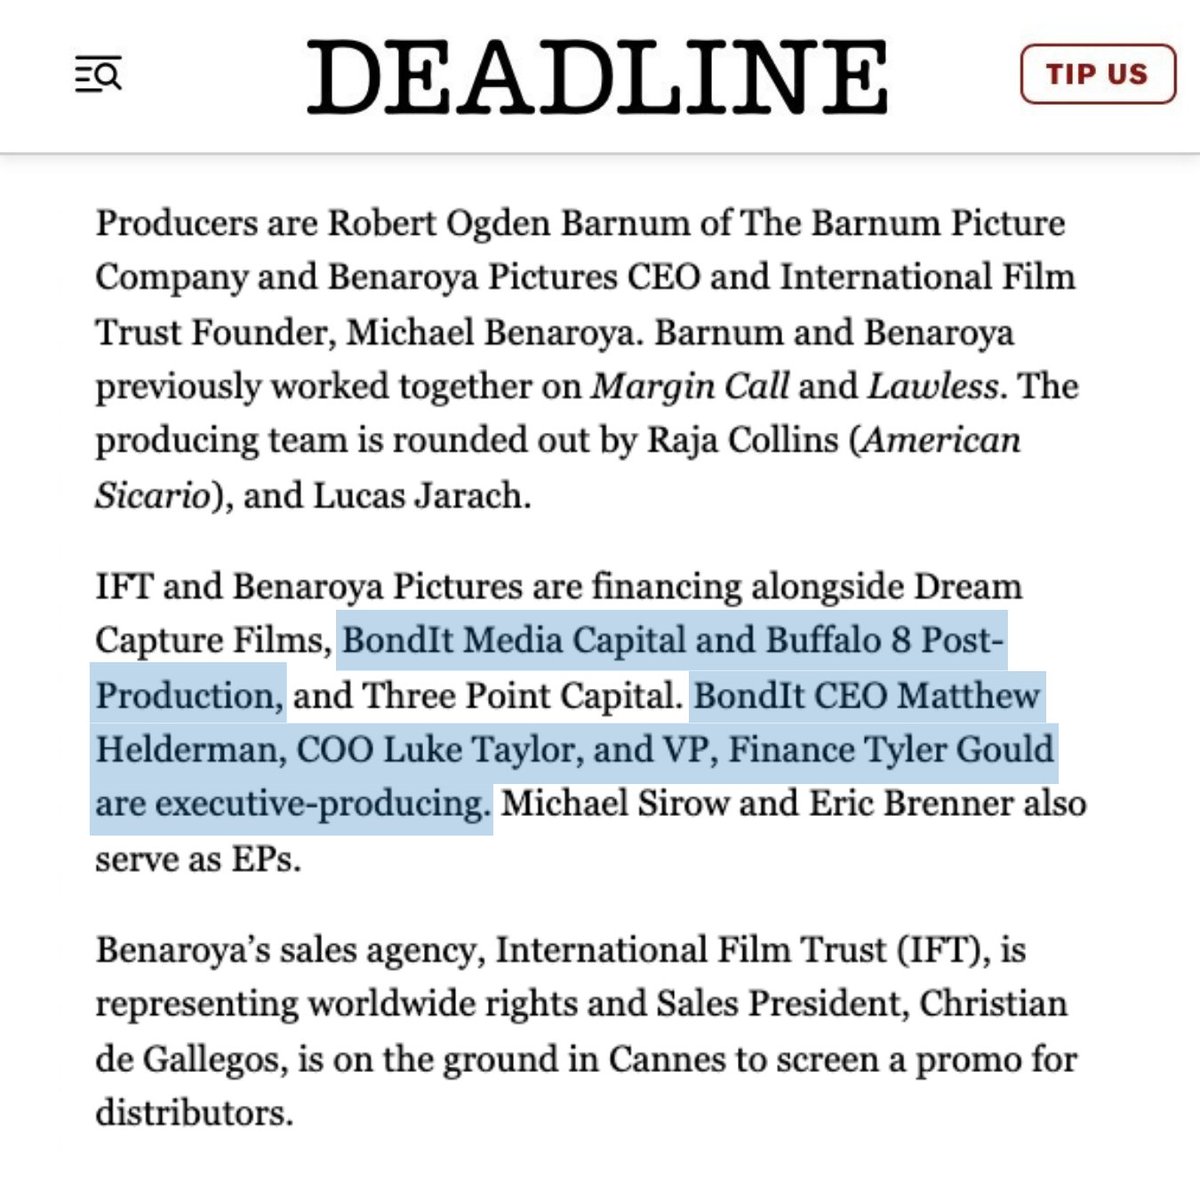 “Ryan Phillippe (Shooter) and Kate Beckinsale (Underworld) are leading thriller ‘The Patient,’ which is launching in the Cannes market with International Film Trust.” — Deadline 📰🌟 Read the full Deadline article here 👉 ow.ly/Cg4k50RGiXj